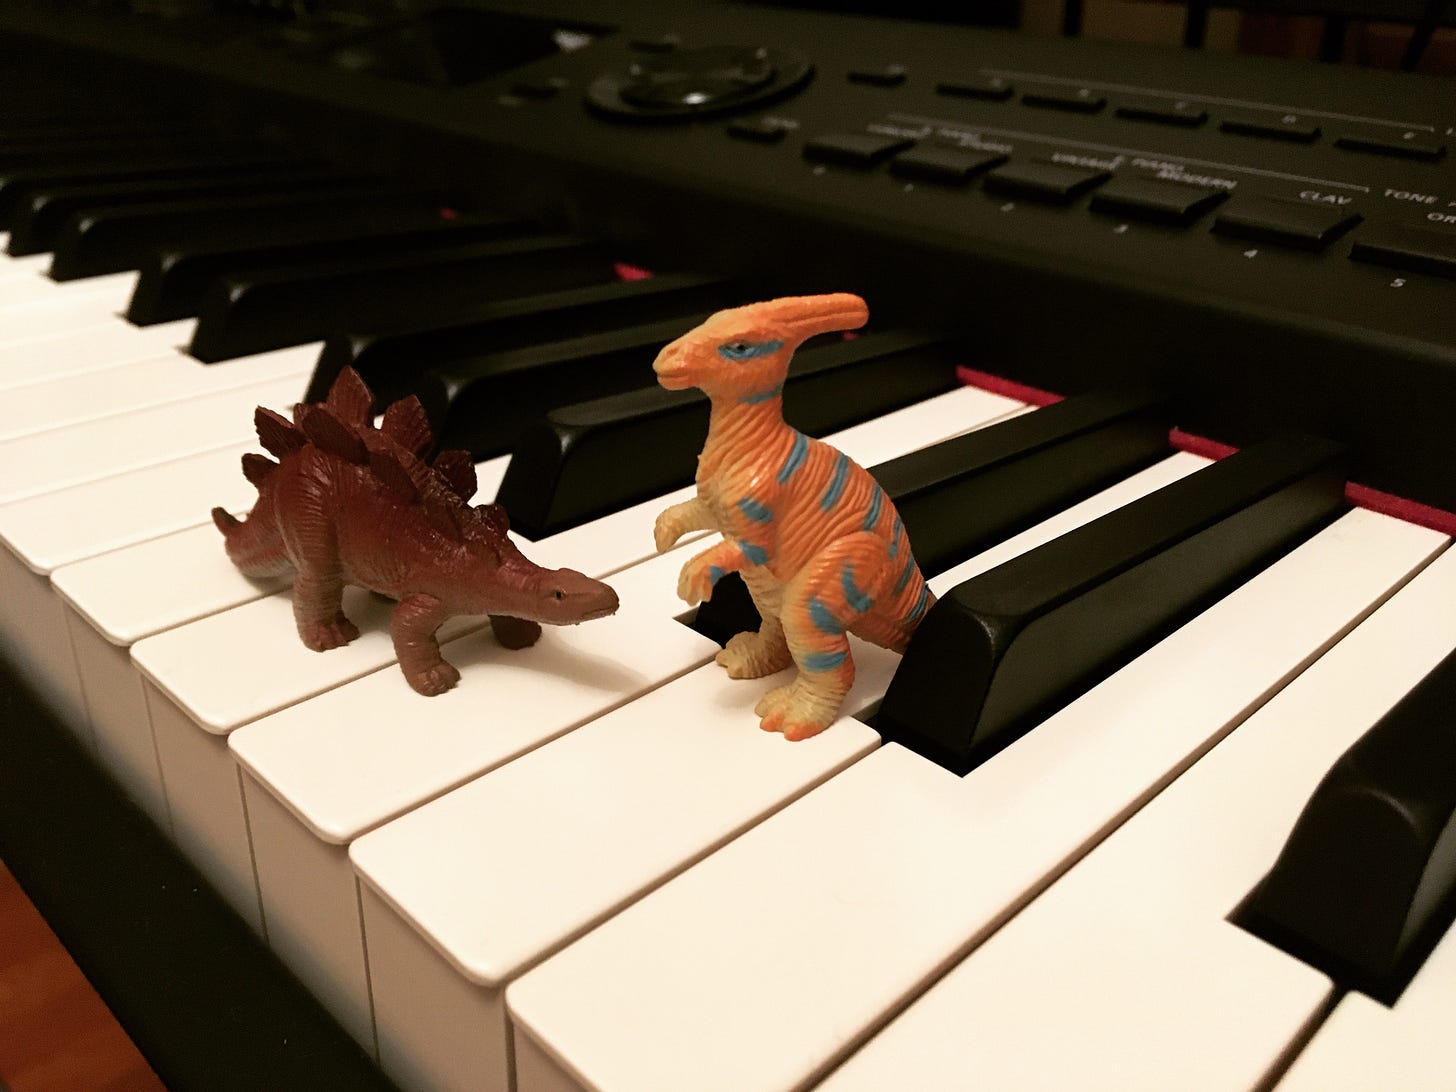 A toy stegosaurus and parasaurolophus standing next to one another on top of a piano keyboard.